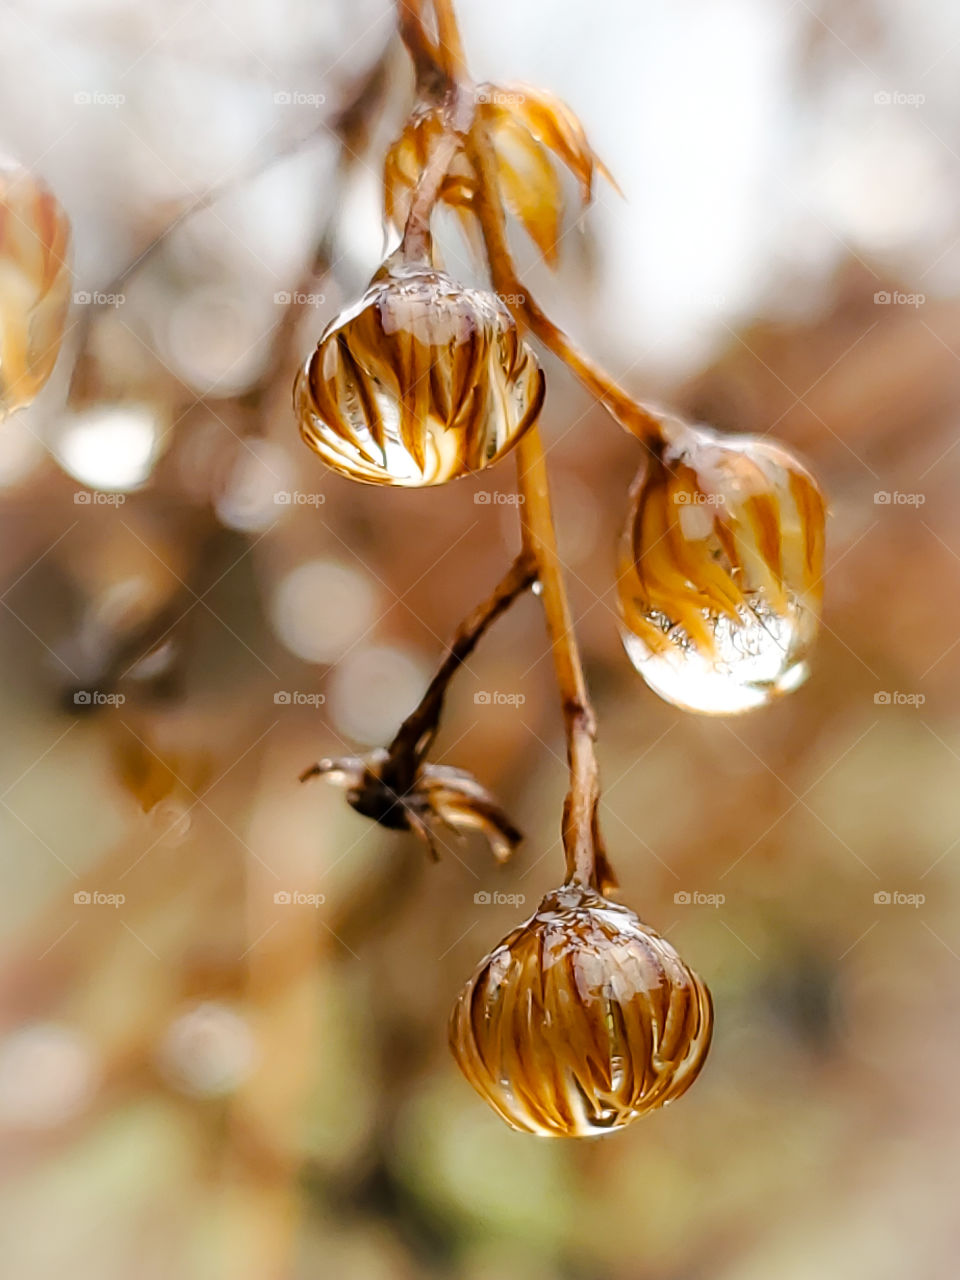 The southern parts of N. America don't see snow very often but they do see freezing temperatures & rain.  Three rain drops of freezing rain are on the remainder of three withered brown wildflower buds while icee flurries fall in the background.